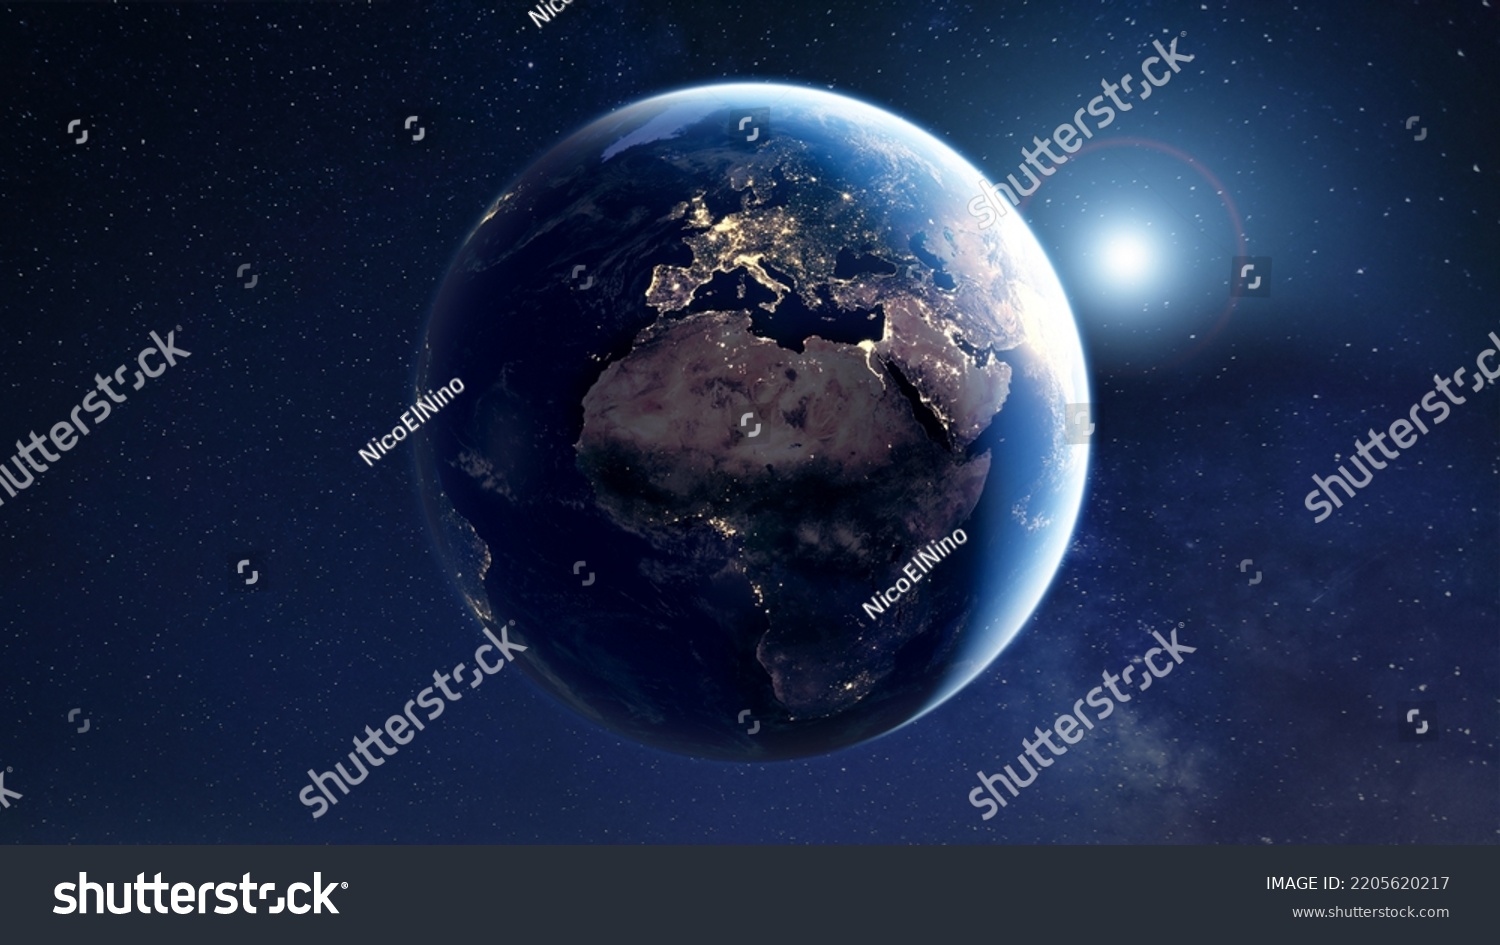 Planet Earth viewed from space with city lights. Technology, global communication, world connections. Satellite view. Elements from NASA. #2205620217